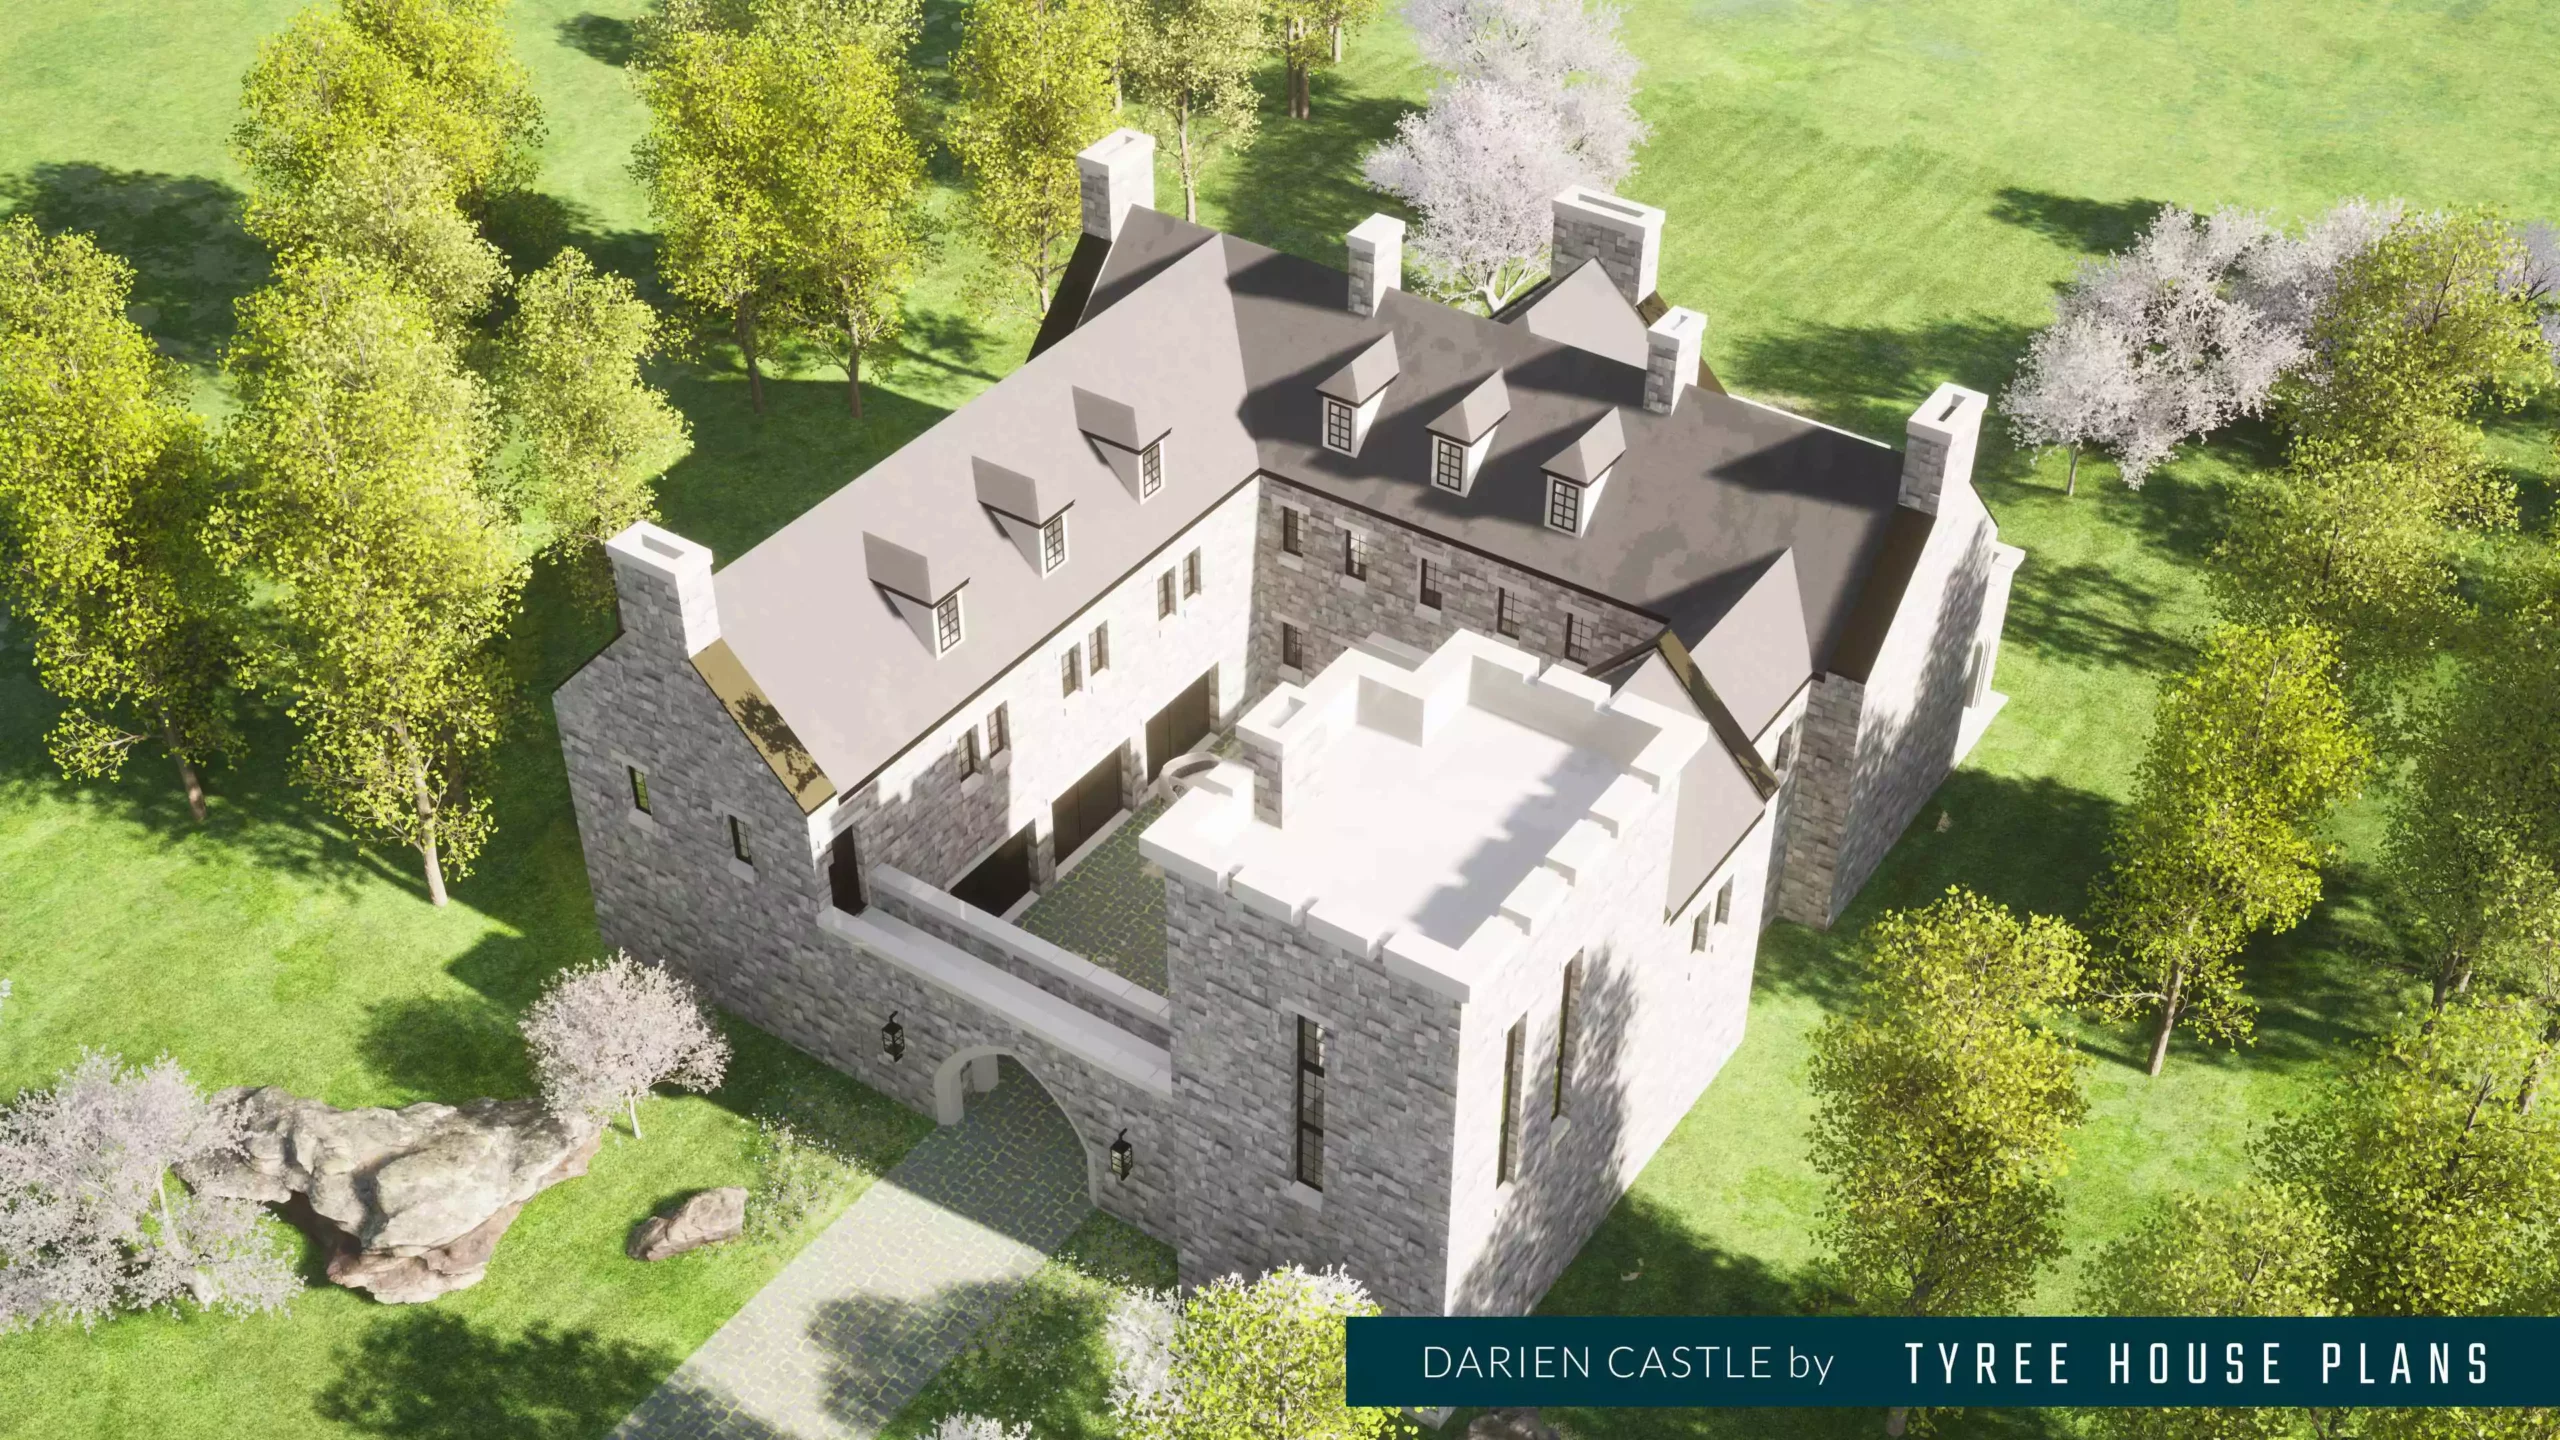 View from above. Darien Castle by Tyree House Plans.